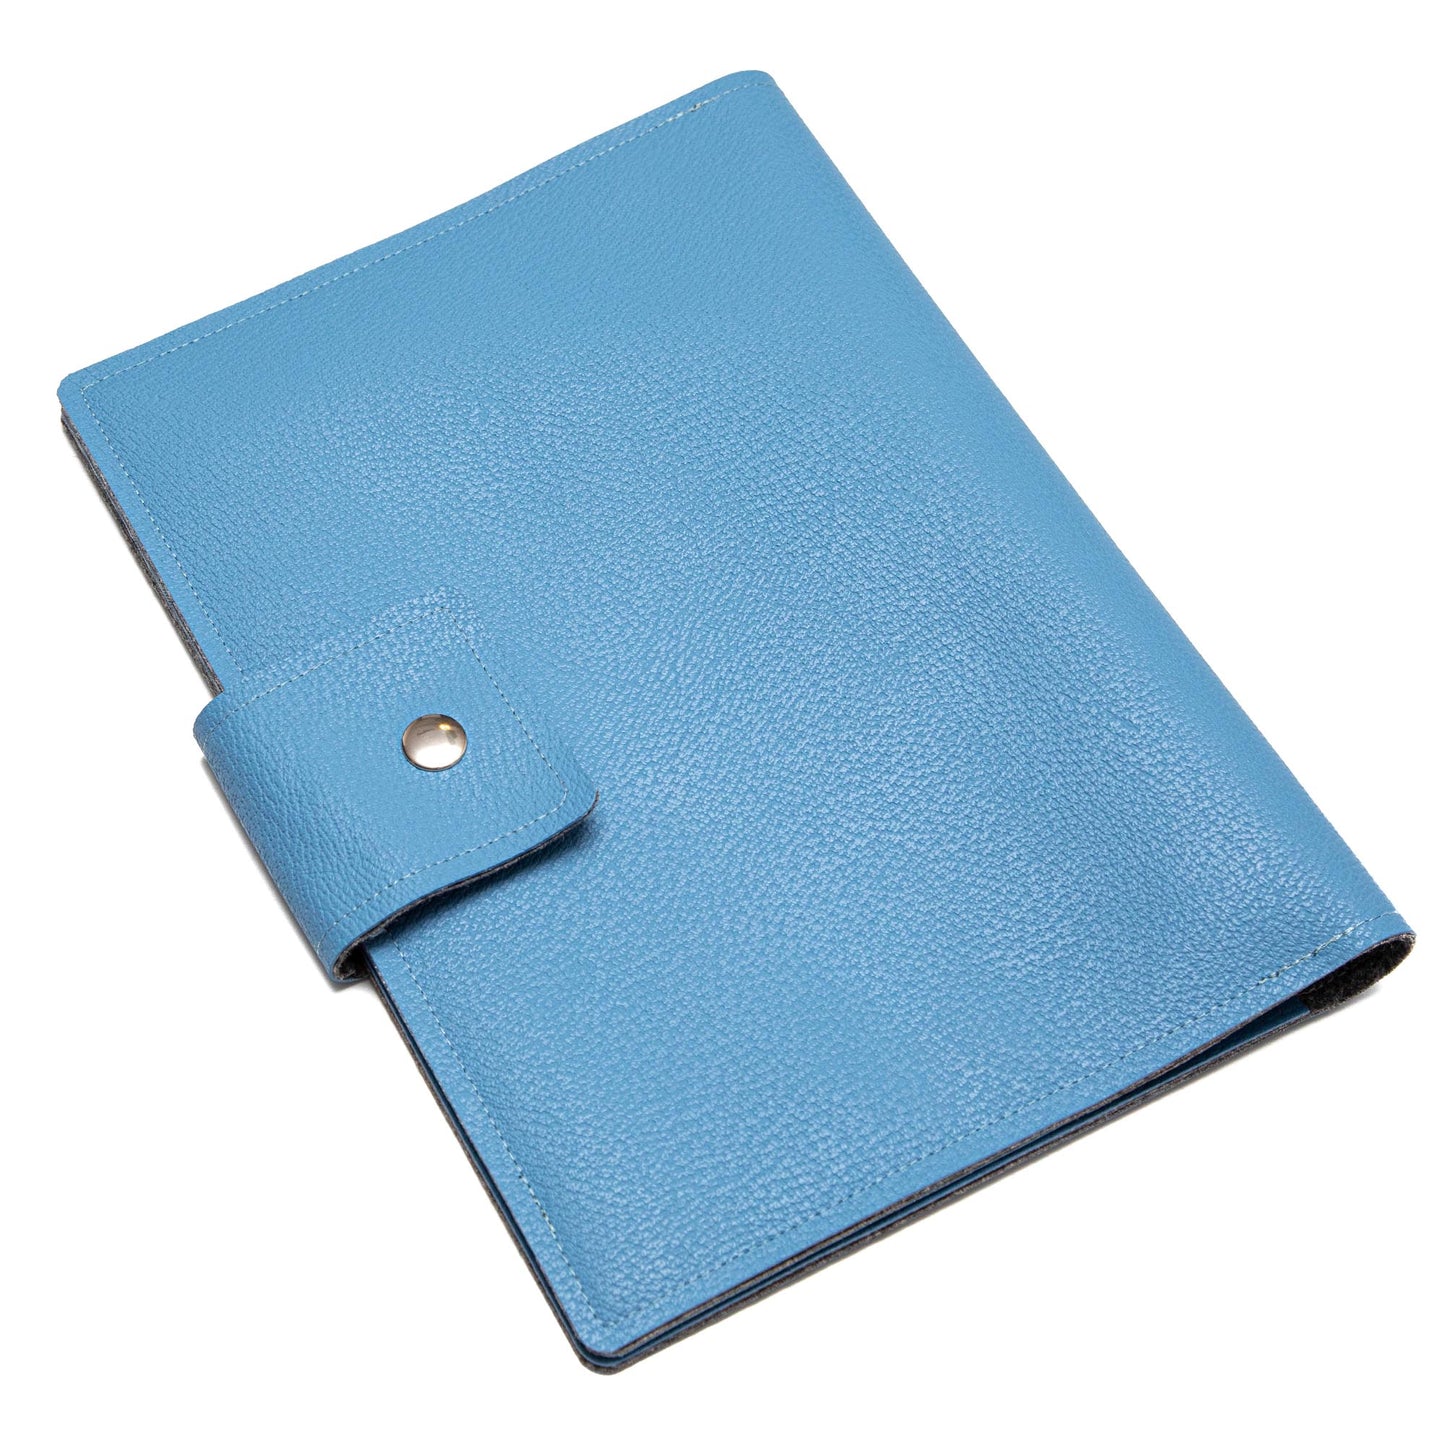 Handmade Folio Cover for iPad/Pro/Air - Sky Blue Faux Leather